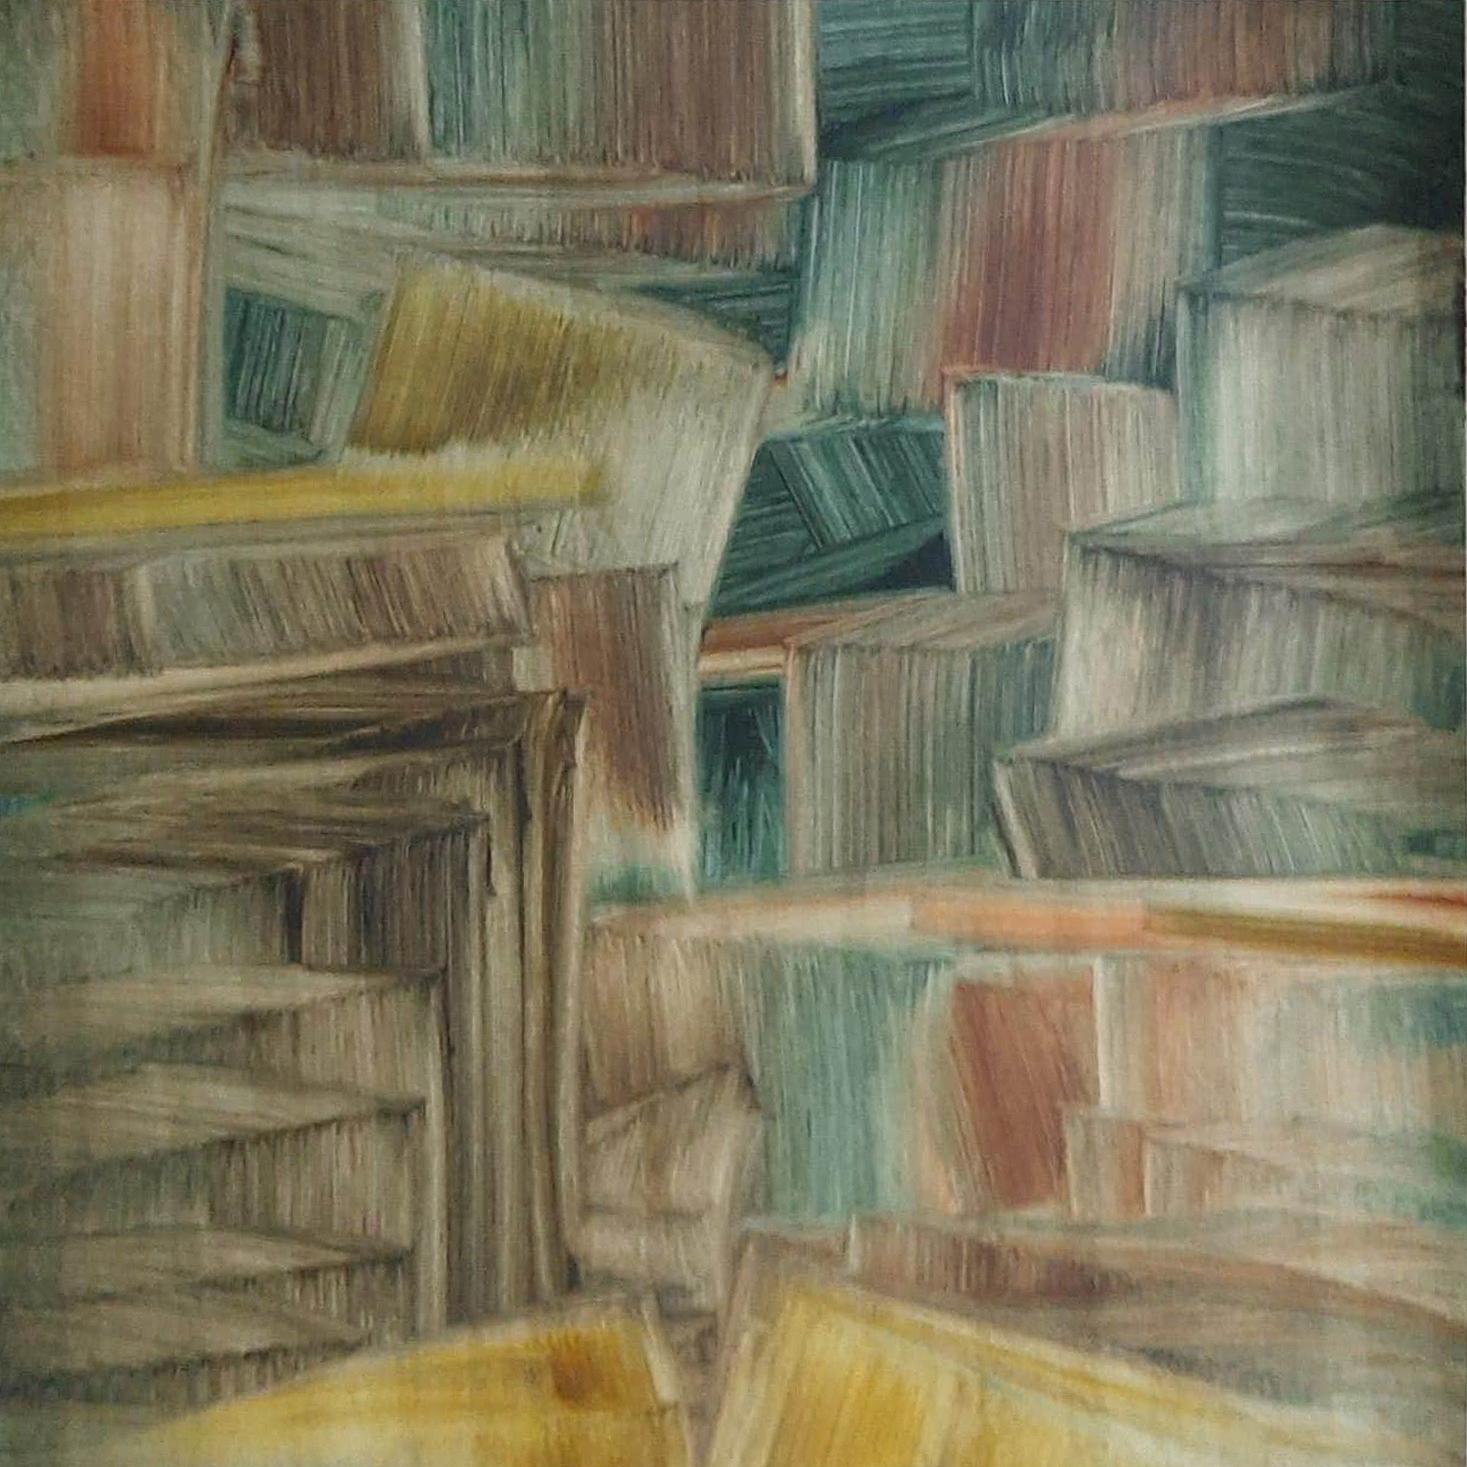 Amit Kalla Interior Painting - Vipasyana Series, Mixed Media on Paper by Contemporary Indian Artist "In Stock"